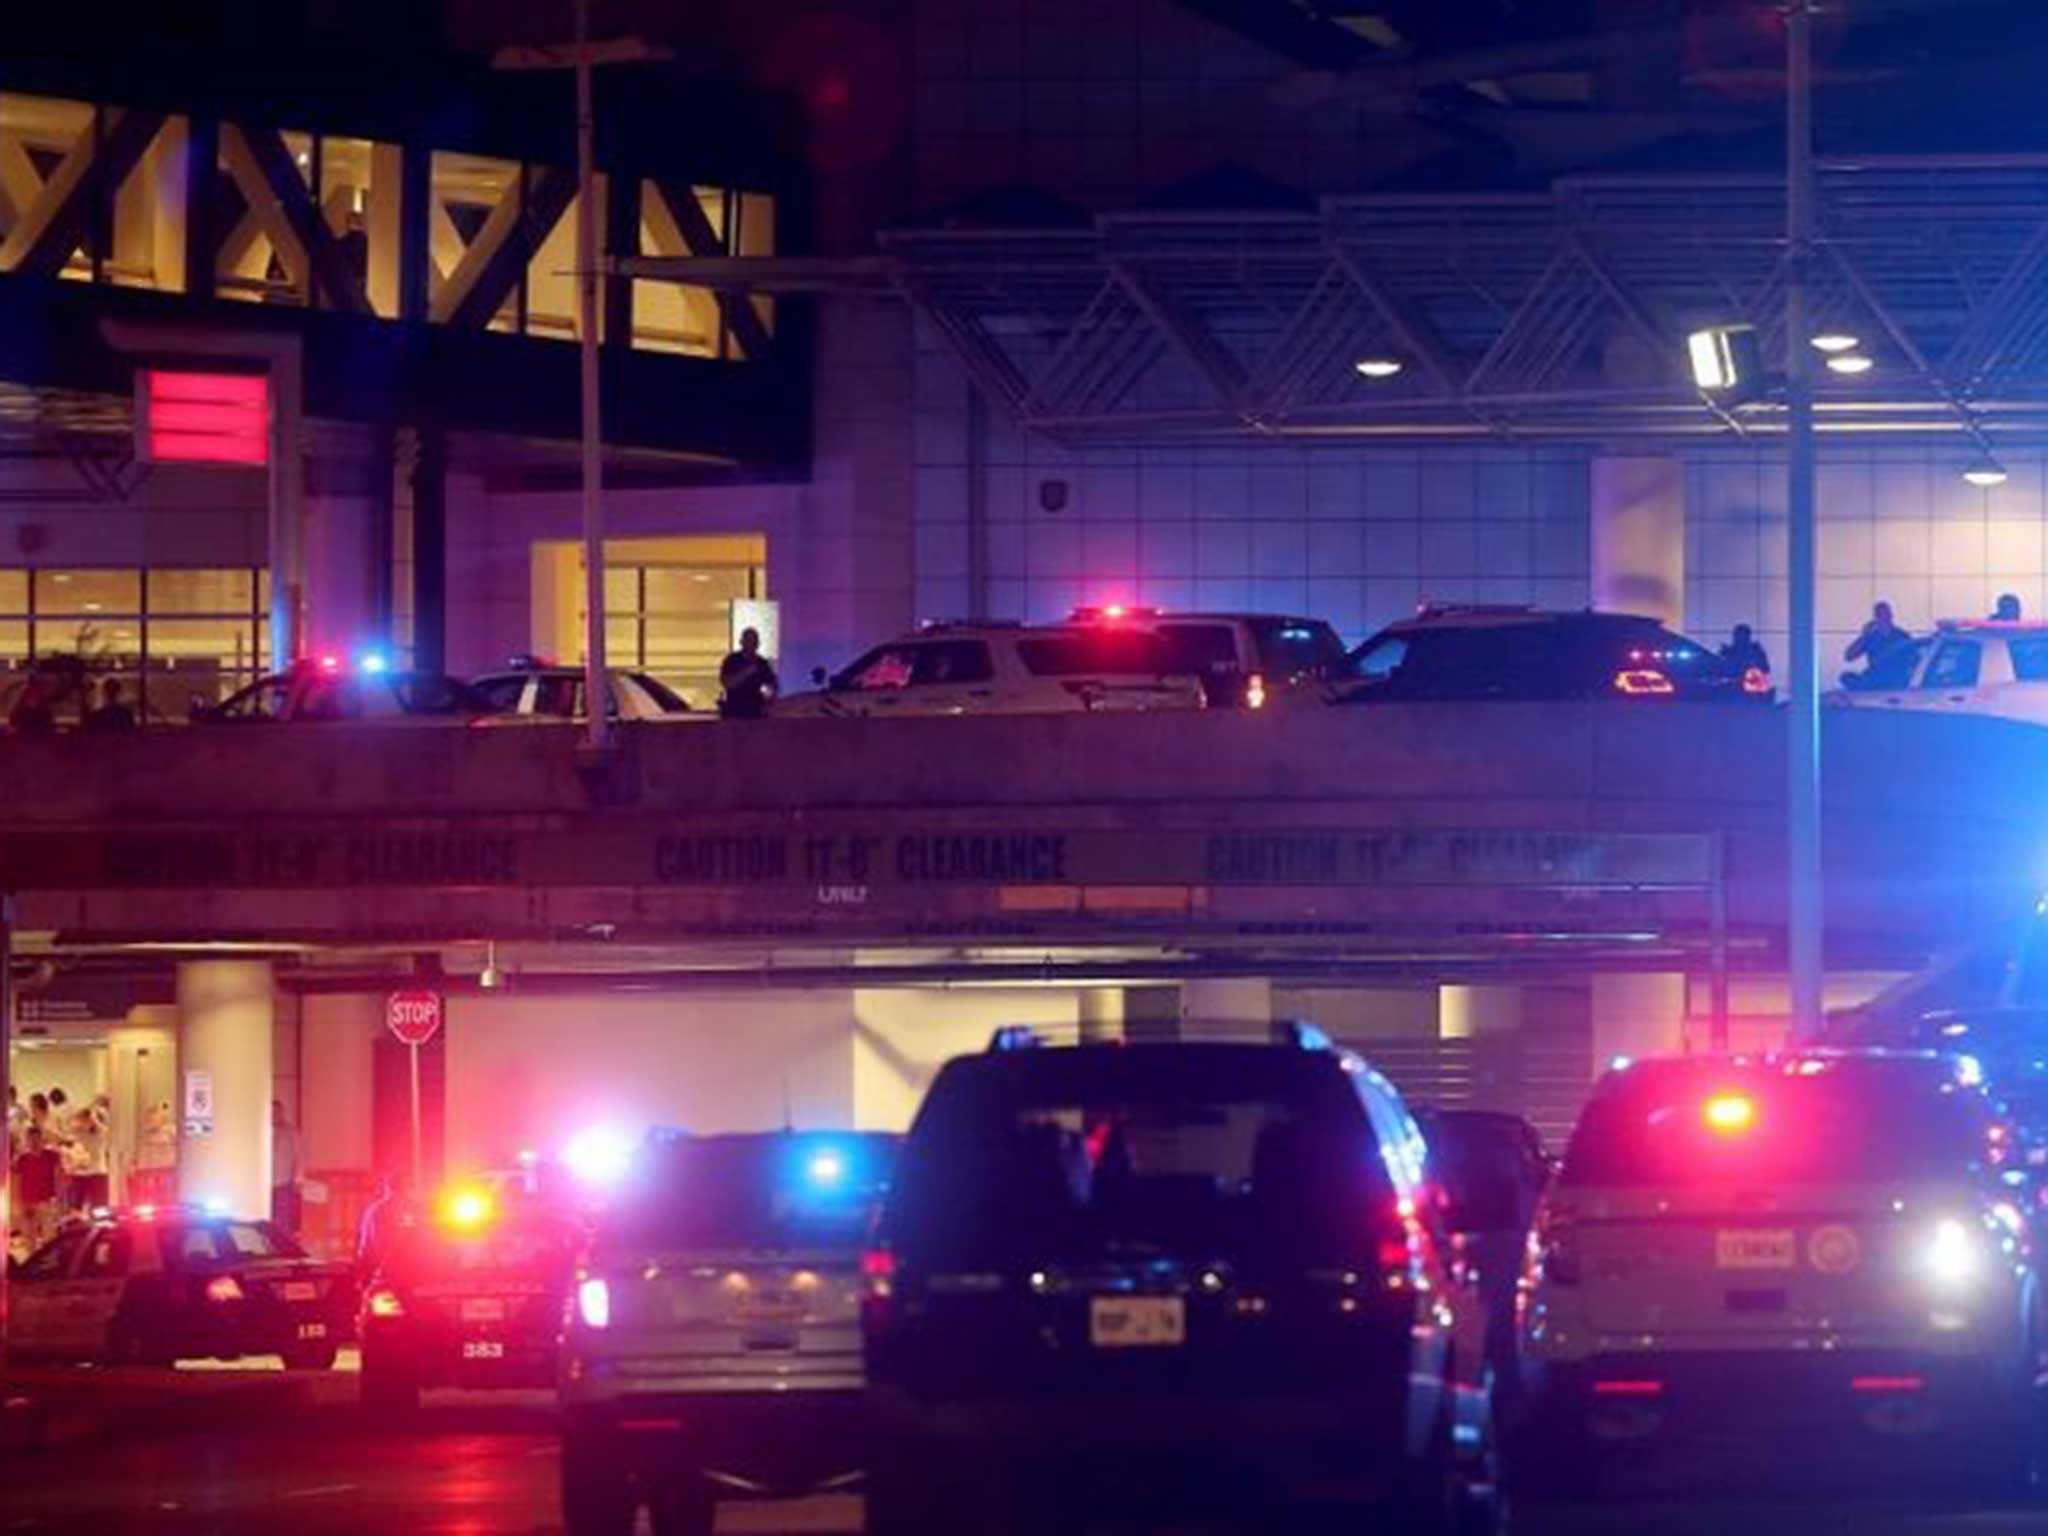 Dozens of police vehicles surround the entrance to New Orleans Louis Armstrong International Airport